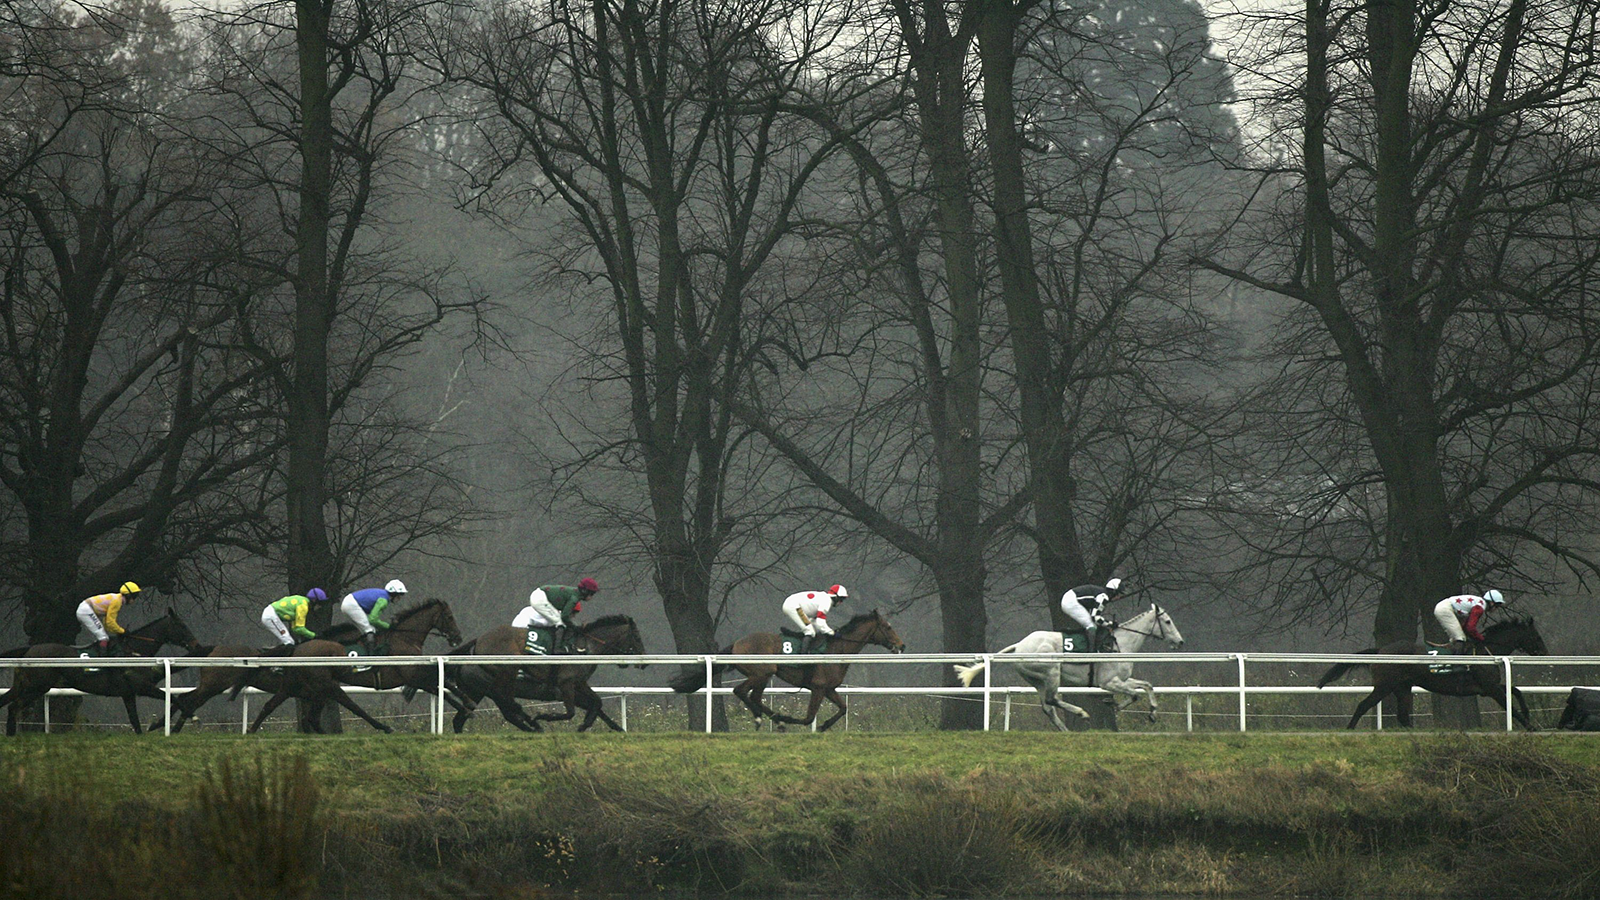 Boxing Day ITV Racing Tips: Top jock, one booked ride – I’m taking the hint